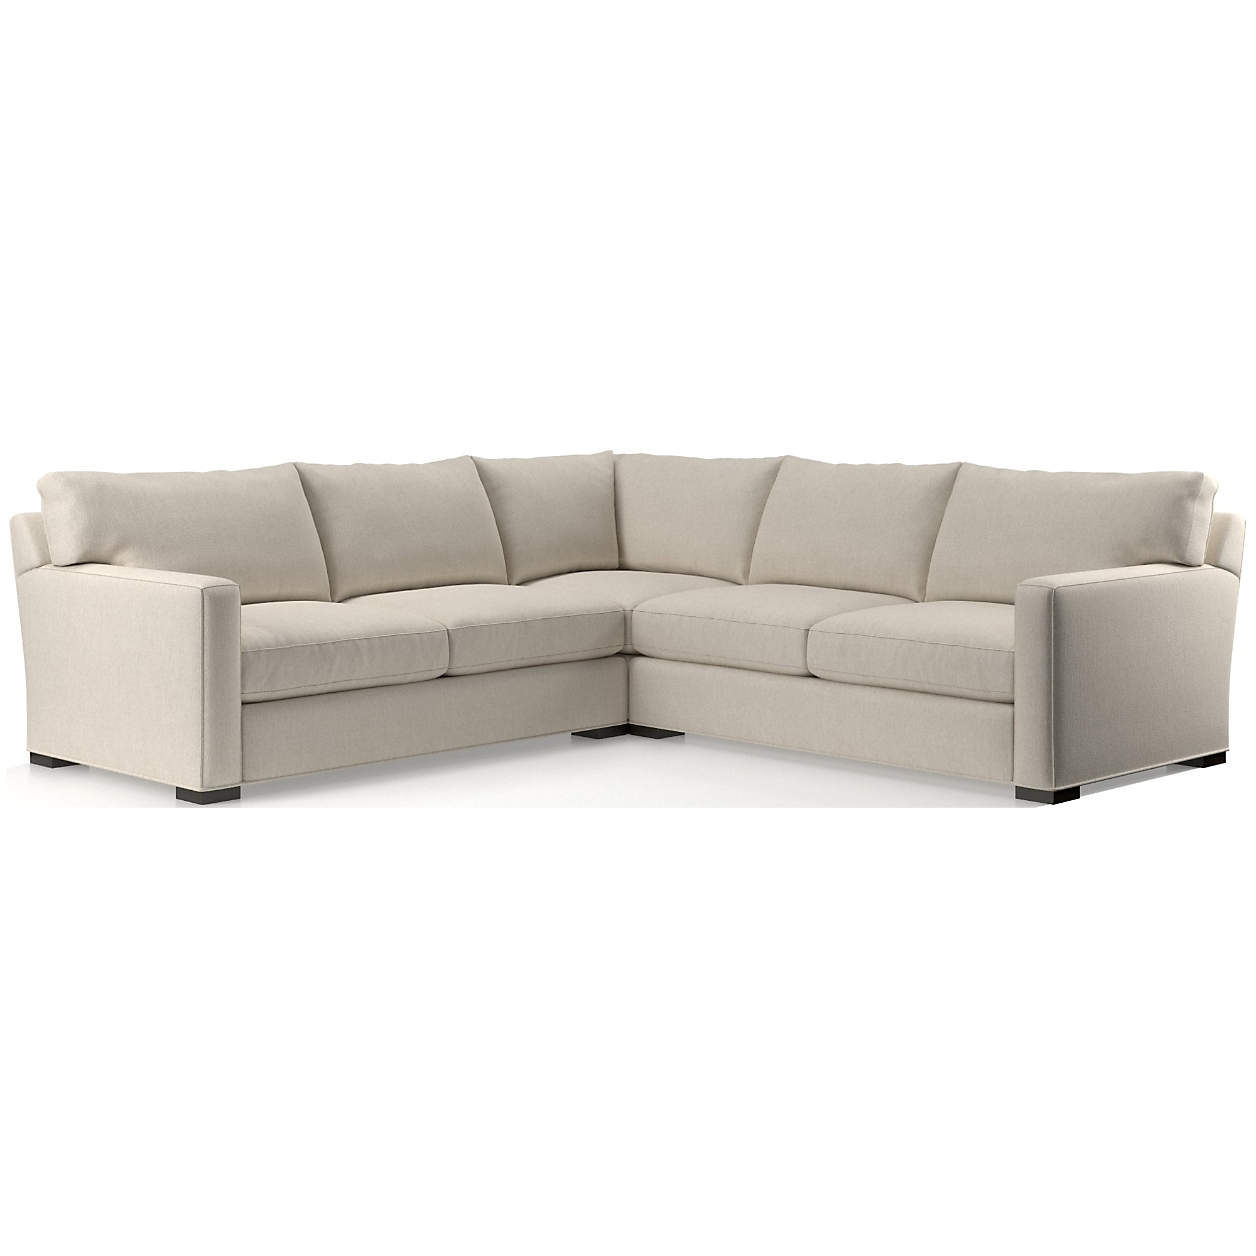 Axis II 3-Piece Sectional Sofa- Fabric: Icon Pearl; Leg: Fossil - Image 1